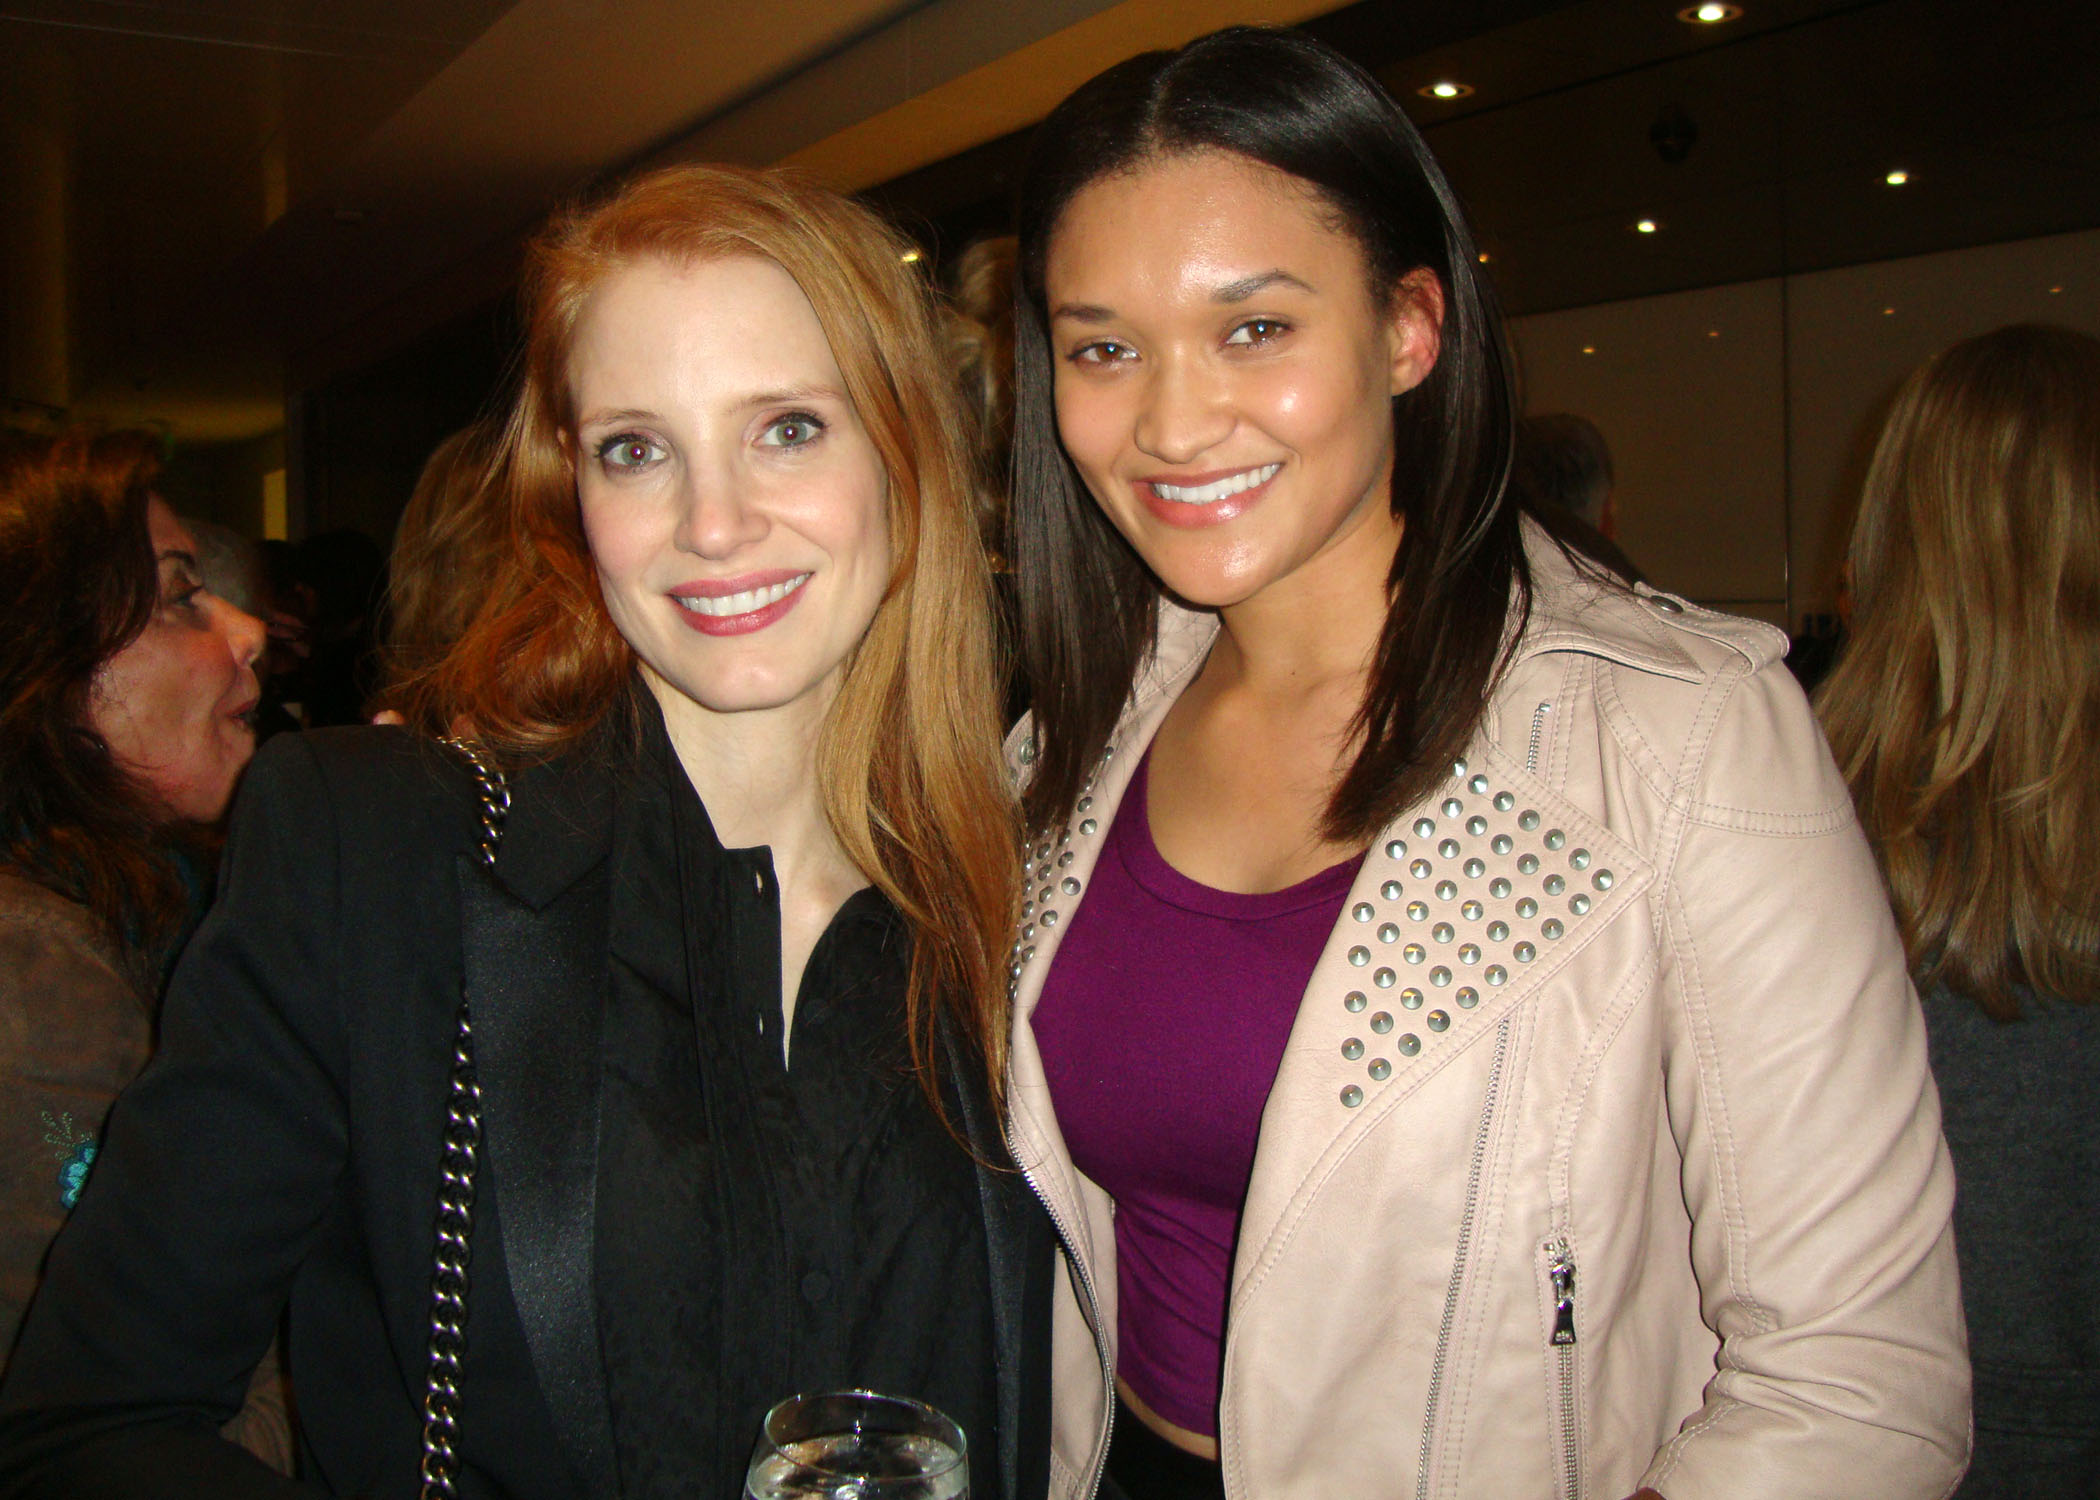 Jessica Chastain and Etalvia Cashin attending the private screening of Blue Jasmine at Creative Artist's Agency in Los Angeles.